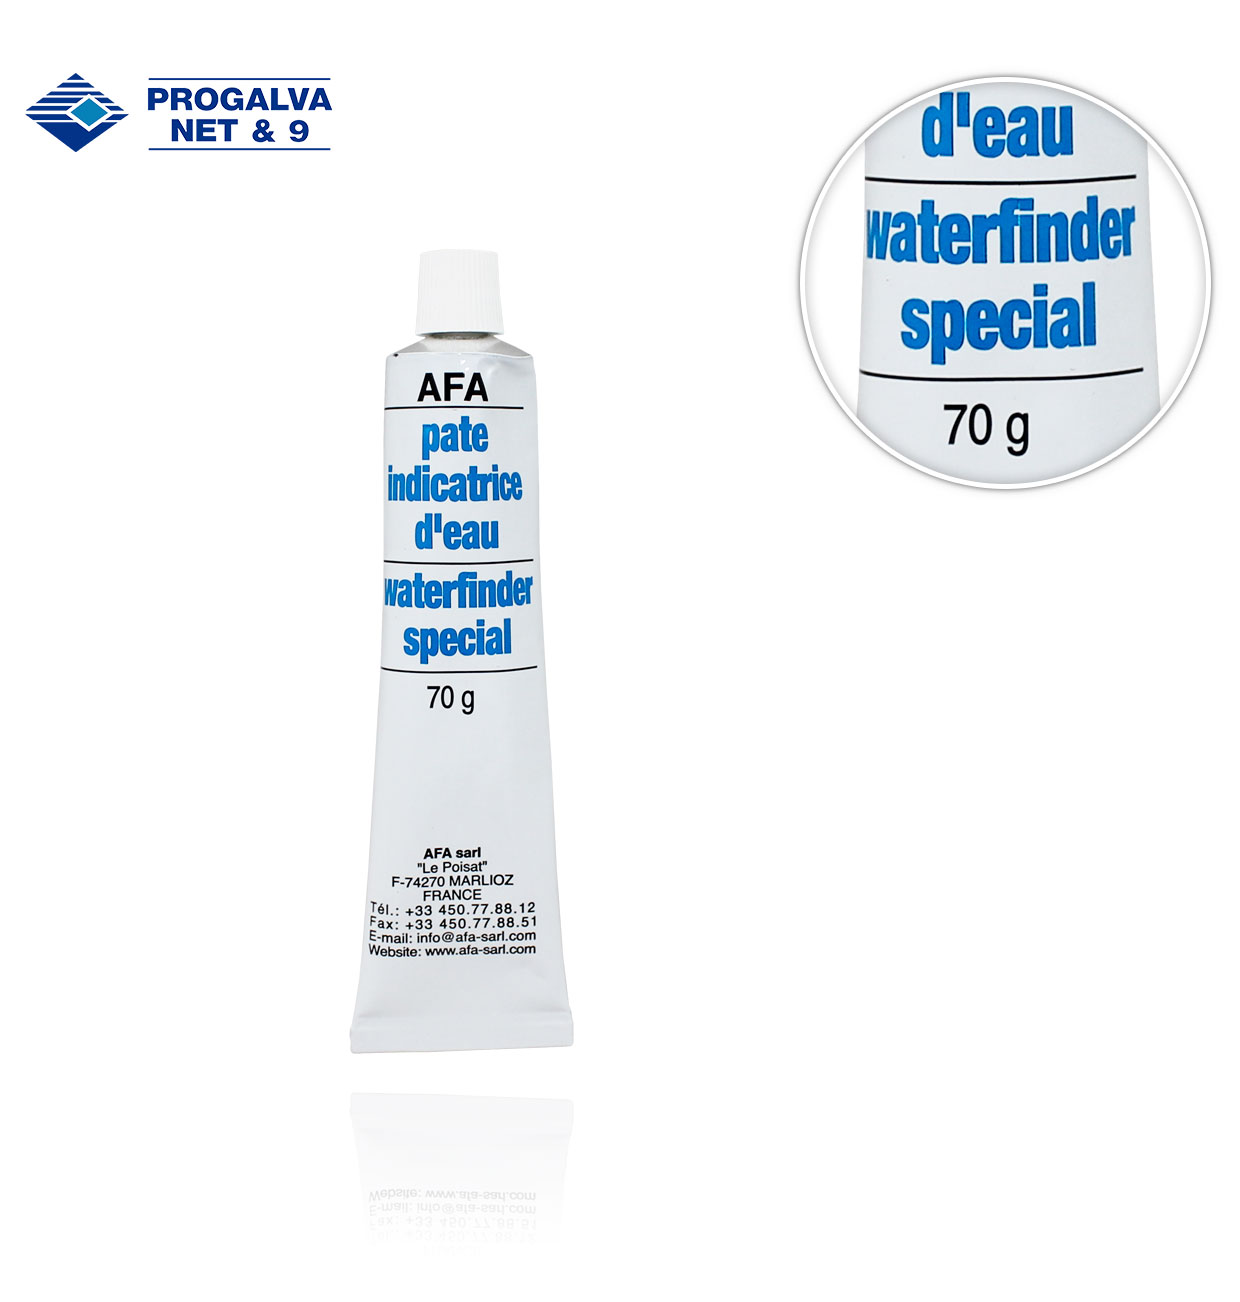 WATER LEVEL INDICATOR PASTE IN GAS OIL***